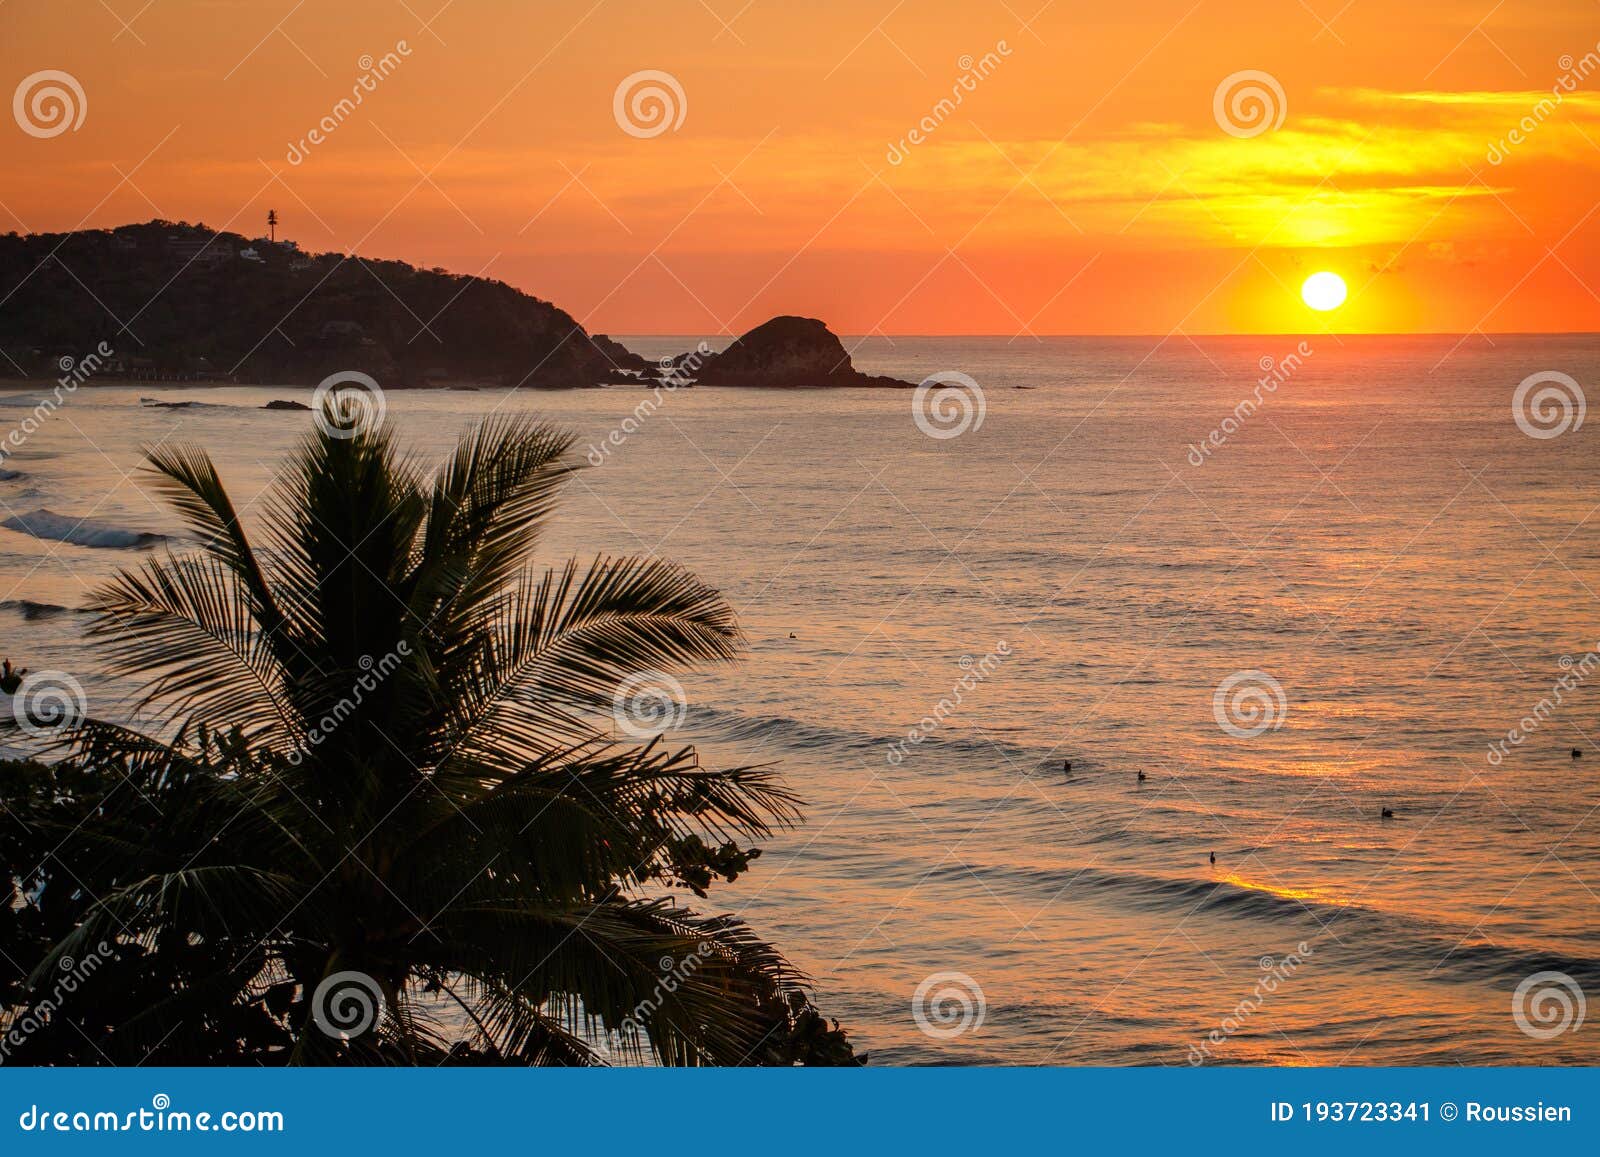 calm sunset scene of zipolite beach in southern mexico